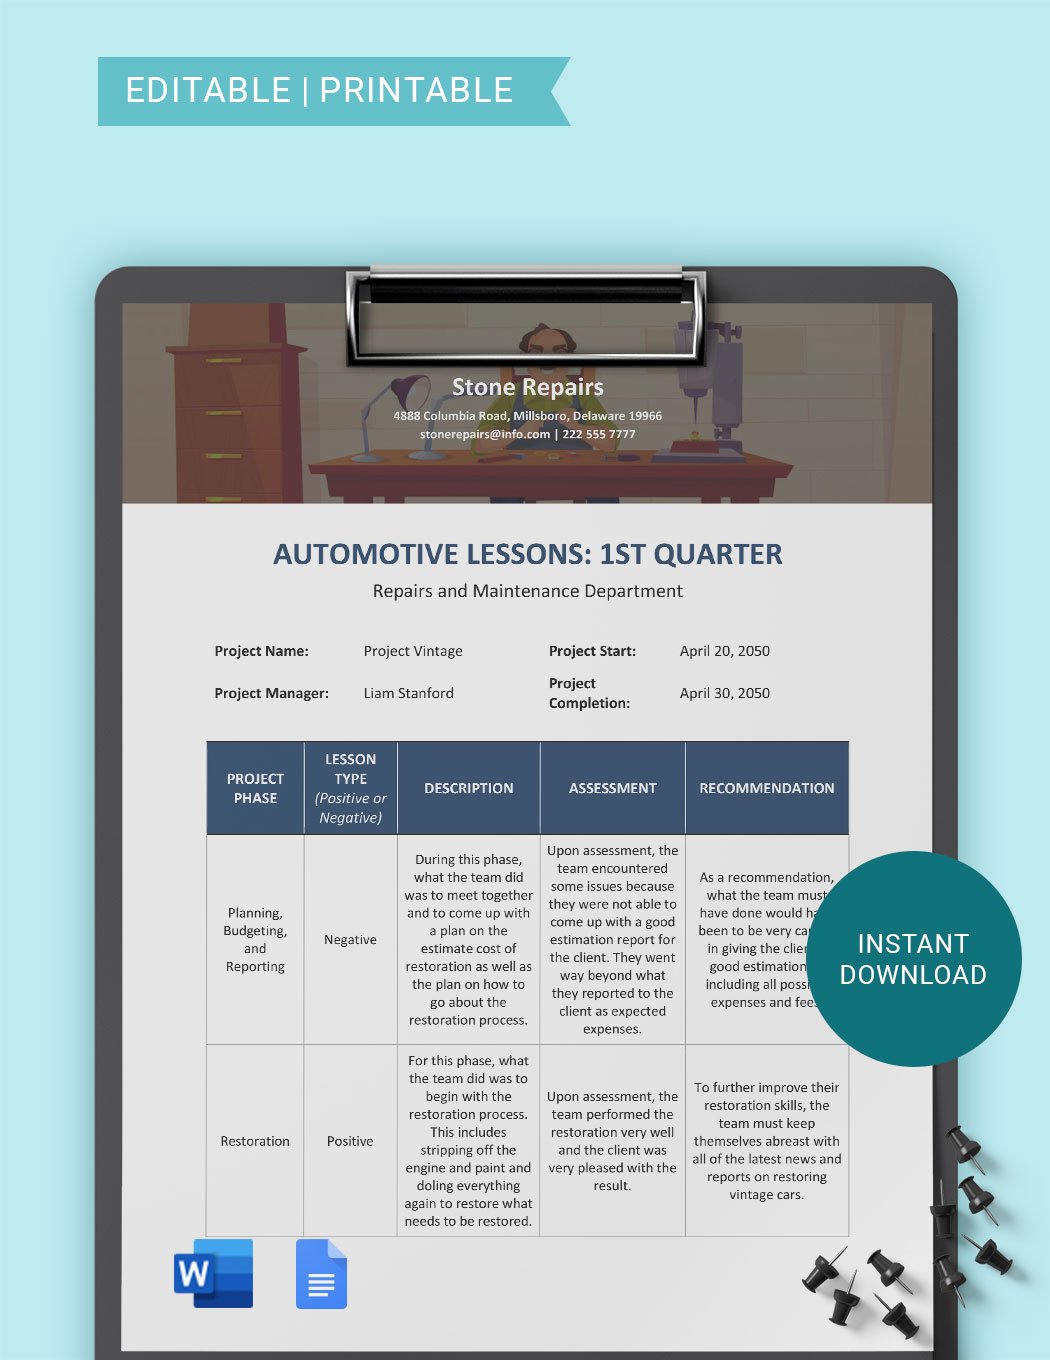 Automotive Lessons Learned Template in Word, Google Docs